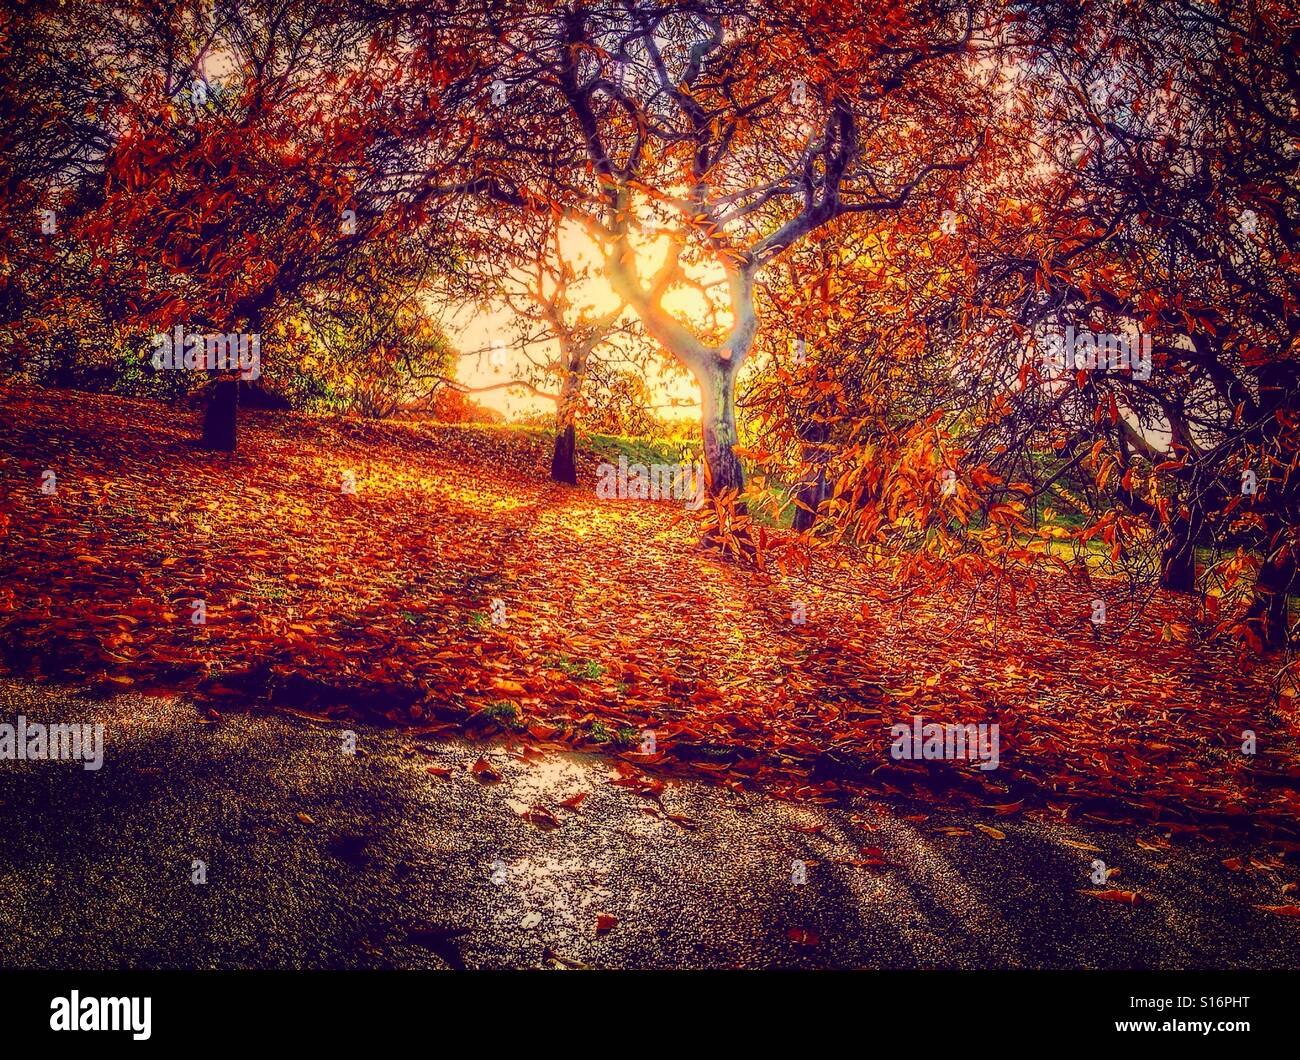 Autumn in Greenwich park. Stock Photo